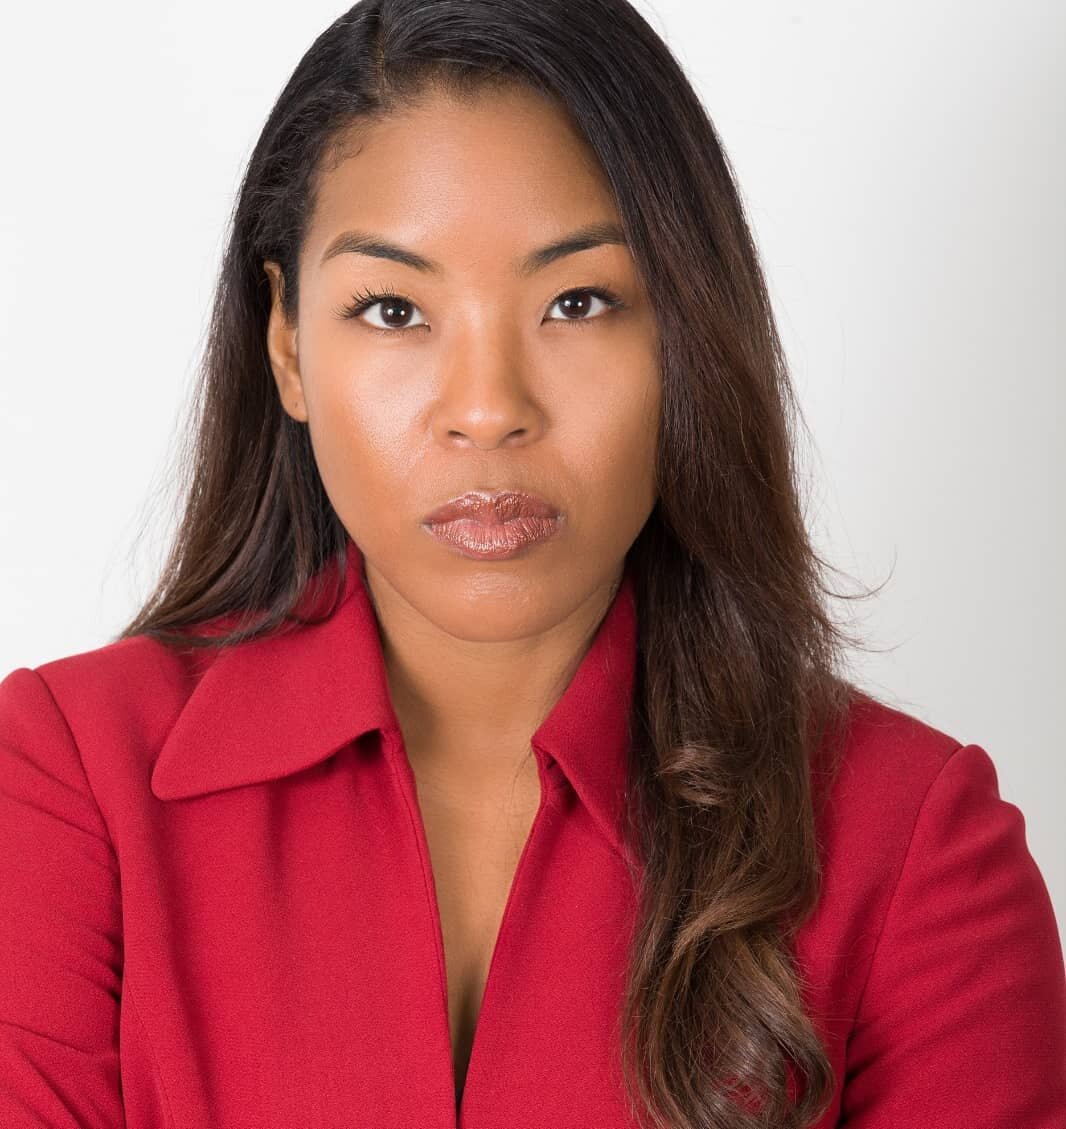 When you're a #lawyer in real life, but you'd rather play one on #tv 😉 #actor #entertainmentlawyer #actorslife #blacklawyers #blacktress #asianactor #blasian #brooklyn #bk #ny #nyactor #NYC #headshot by 📸 @iseeflicks